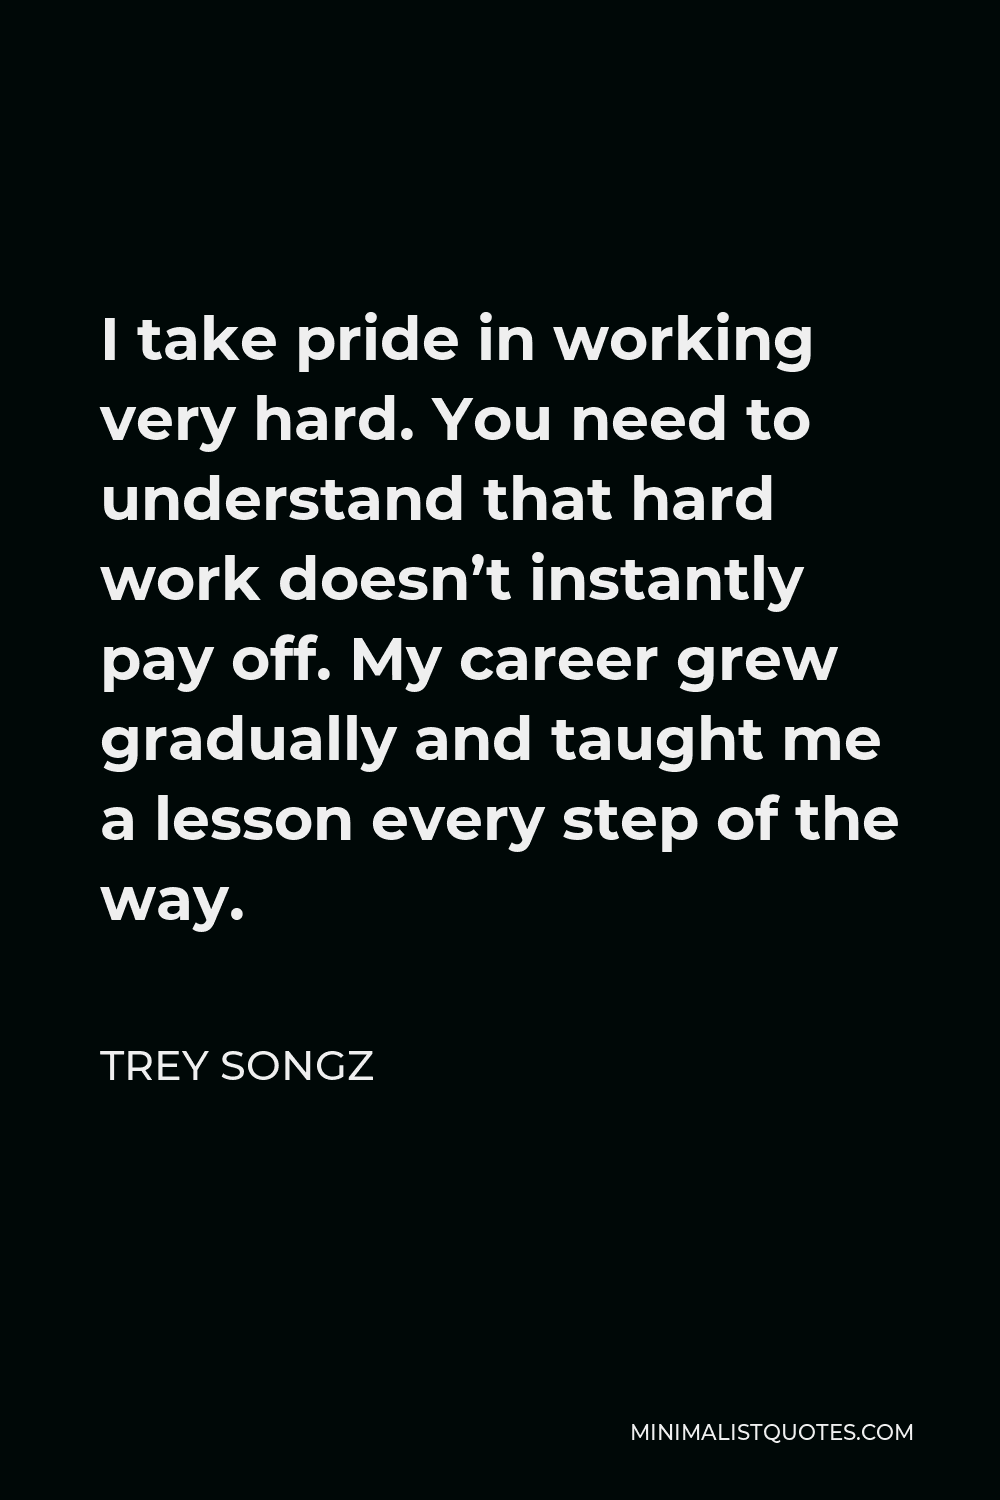 Trey Songz Quote - I take pride in working very hard. You need to understand that hard work doesn’t instantly pay off. My career grew gradually and taught me a lesson every step of the way.